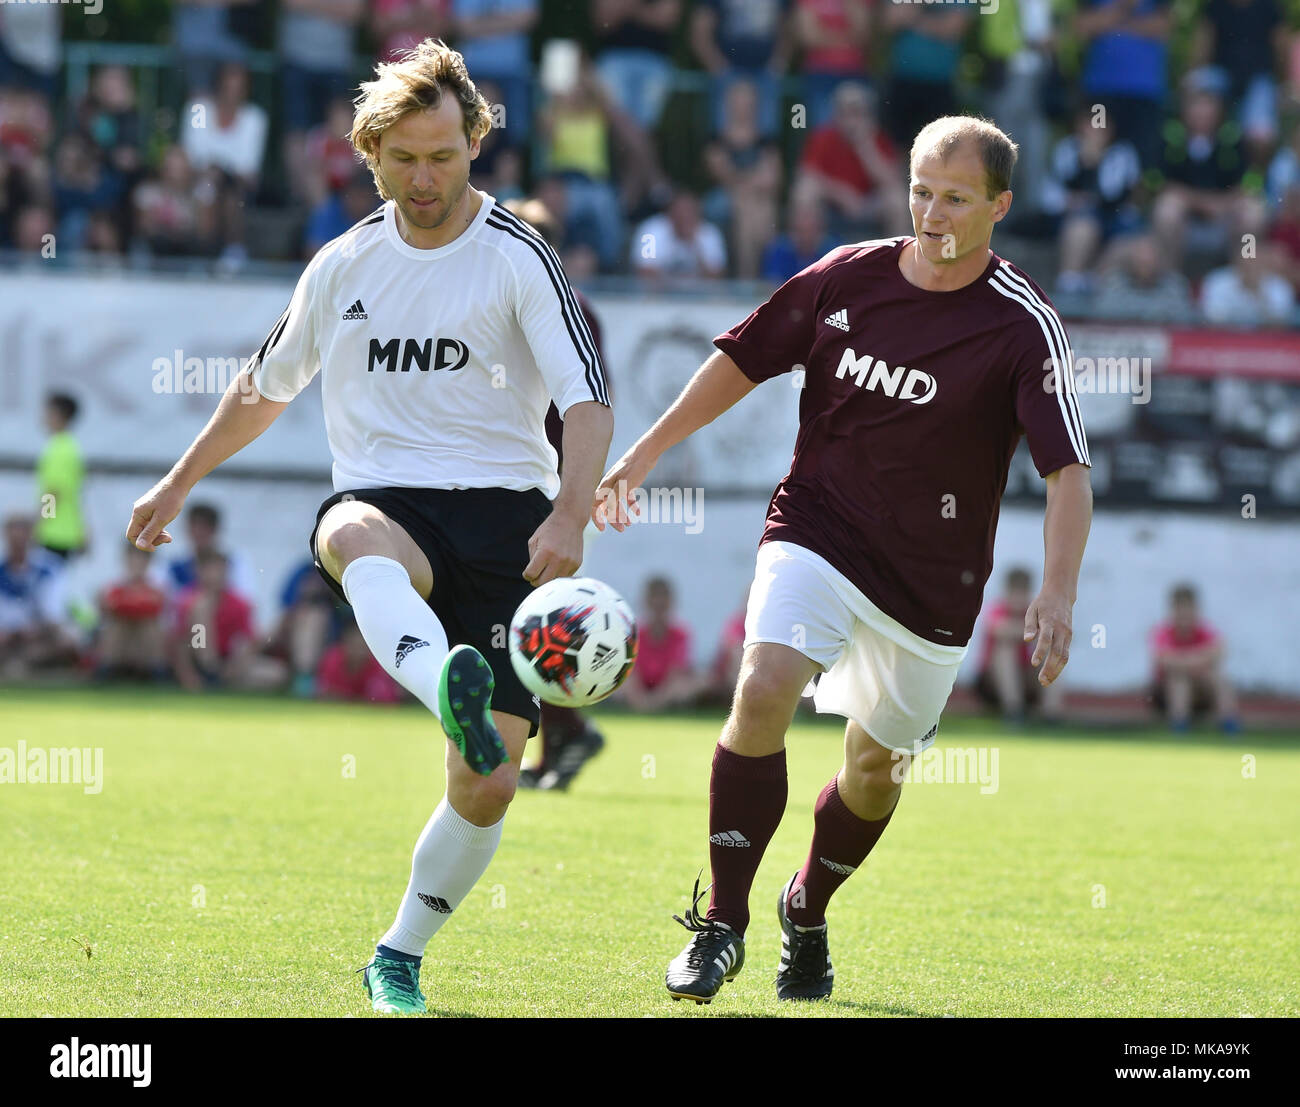 Hodonin, Czech Republic. 05th May, 2018. Former Czech soccer player Pavel Nedved, left, in action during the benefit match FK Hodonin vs second placed team of the European football championship 1996 prior to 100 years of Hodonin football events in Hodonin, Czech Republic, May 5, 2018. Credit: Dalibor Gluck/CTK Photo/Alamy Live News Stock Photo